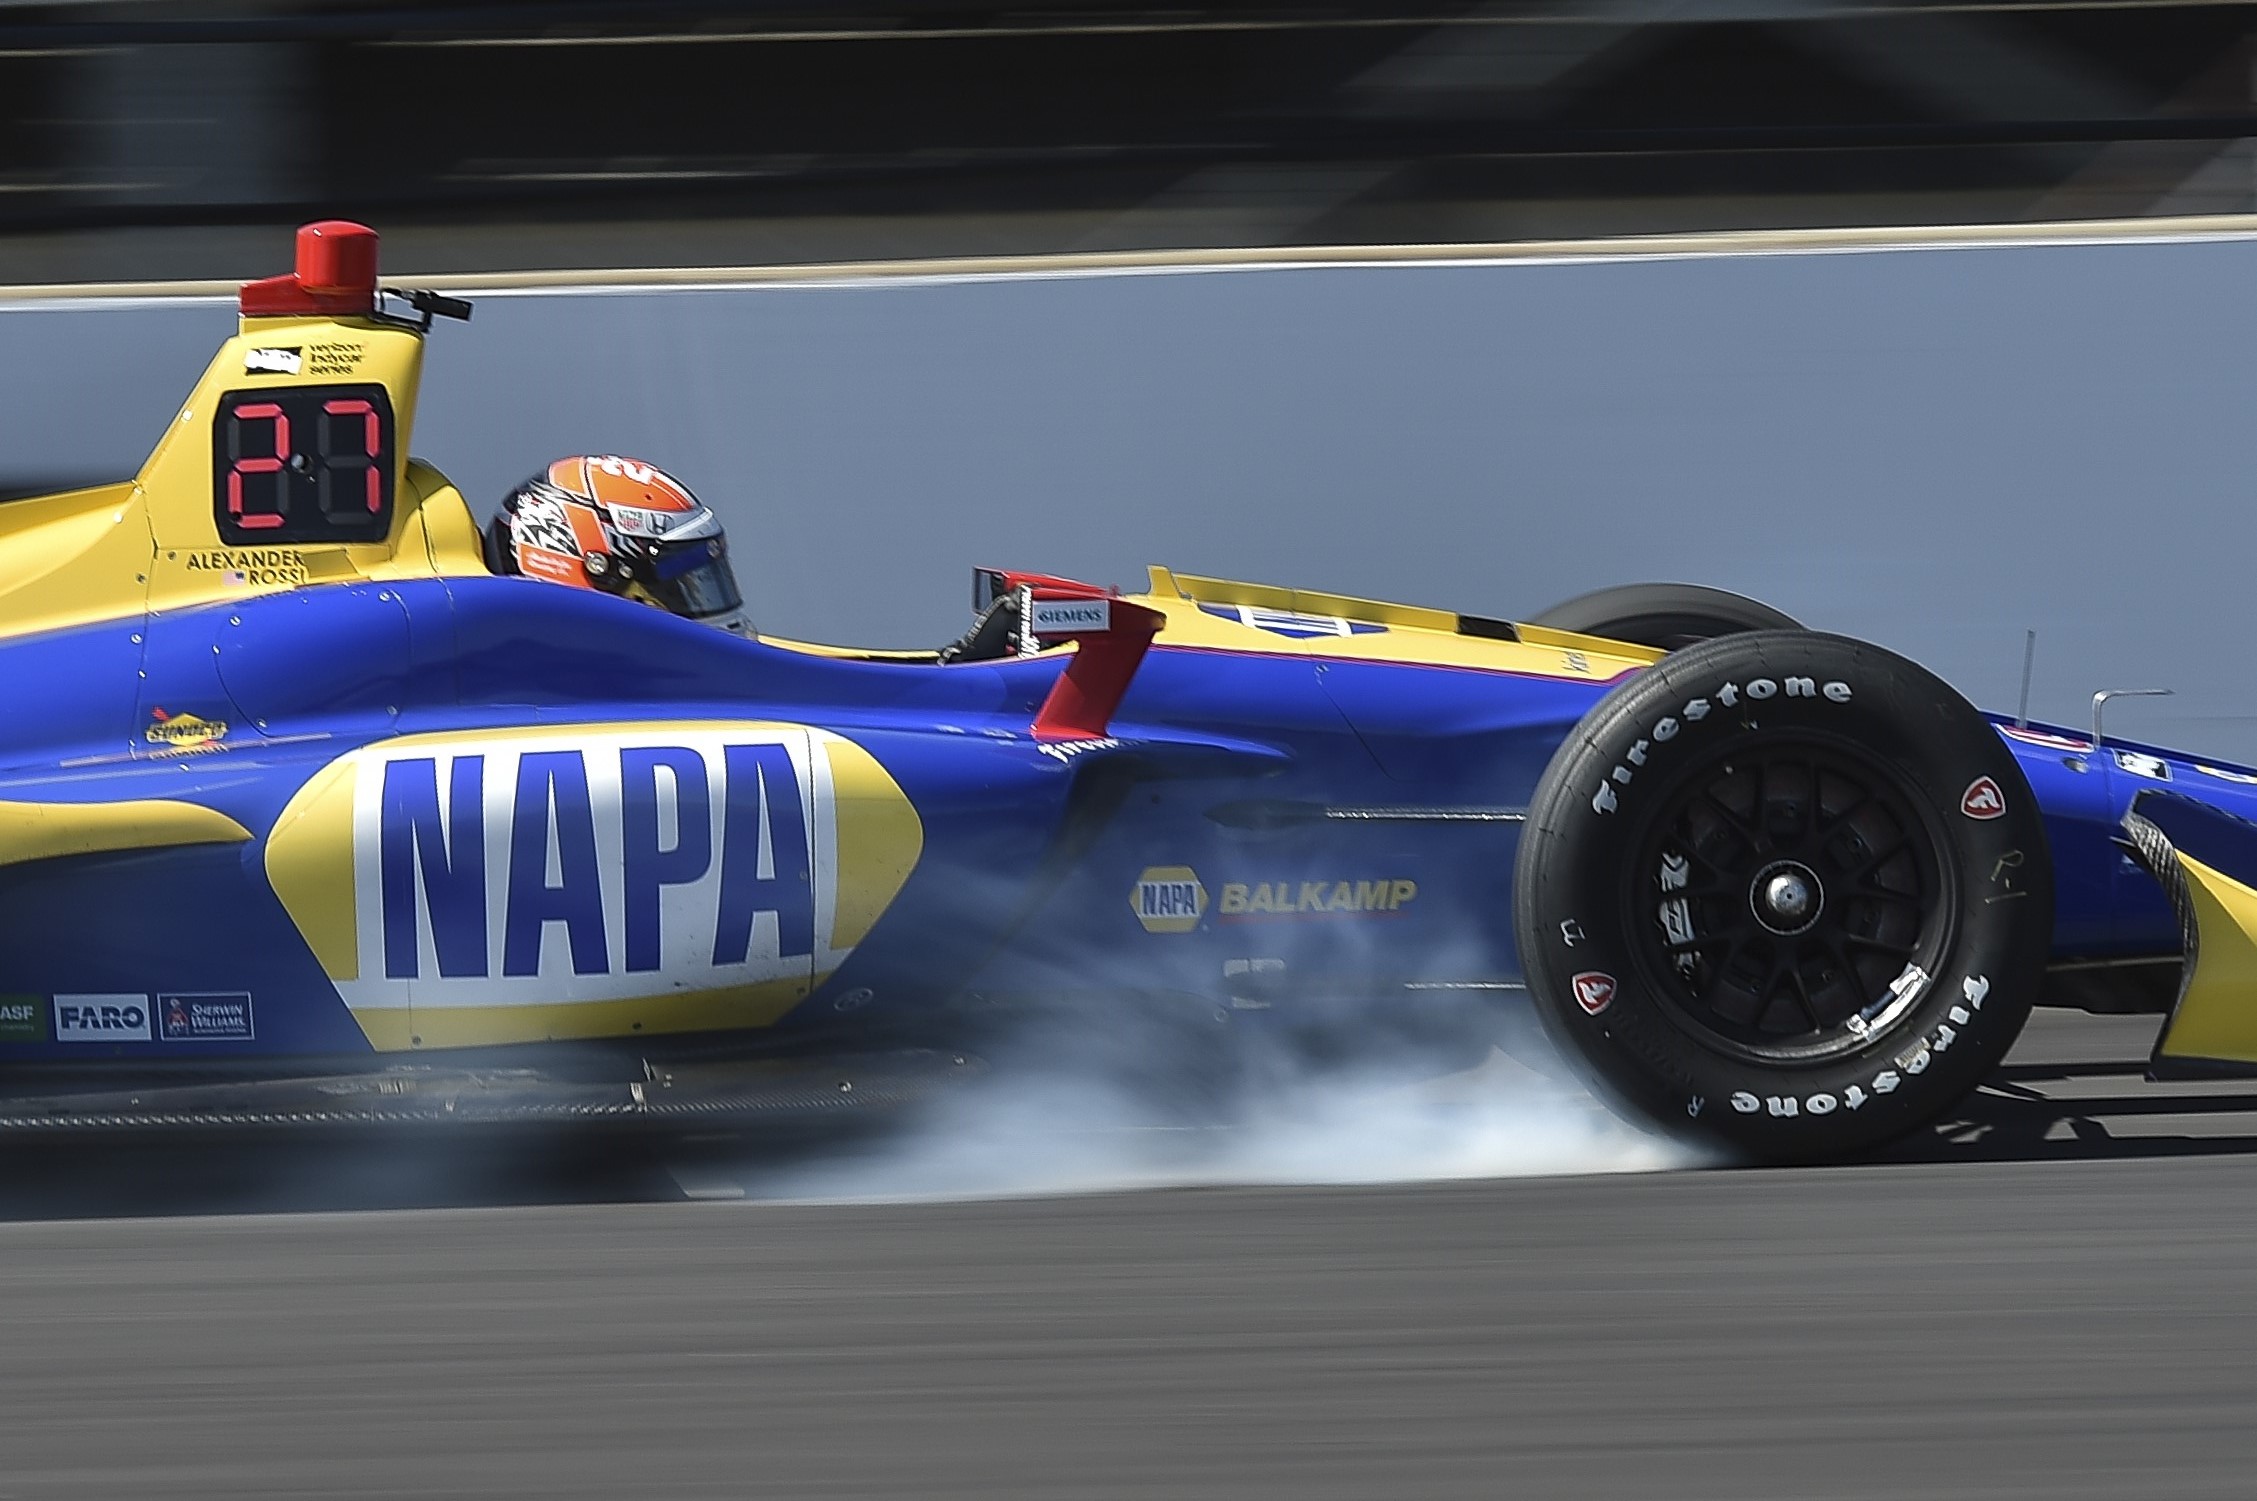  Coming in hot!&nbsp; Alexander Rossi locks up the breaks during the INDYCAR GRAND PRIX     